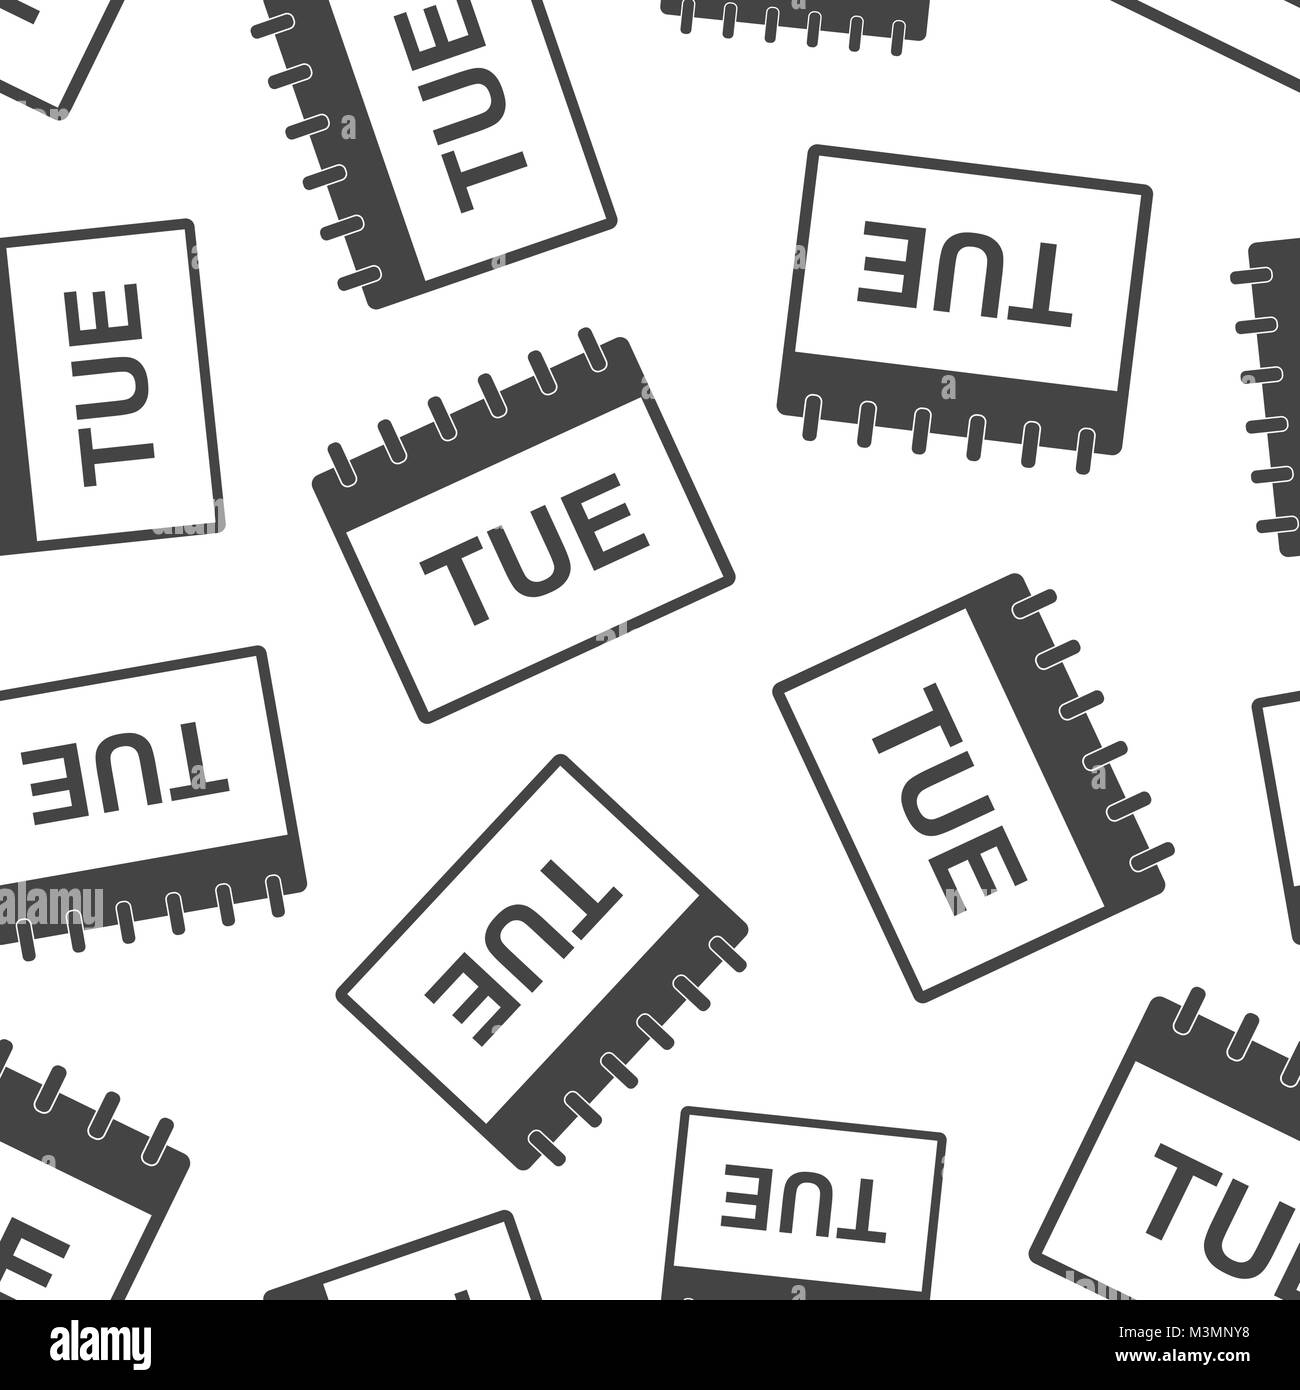 tuesday-calendar-page-seamless-pattern-background-business-flat-vector